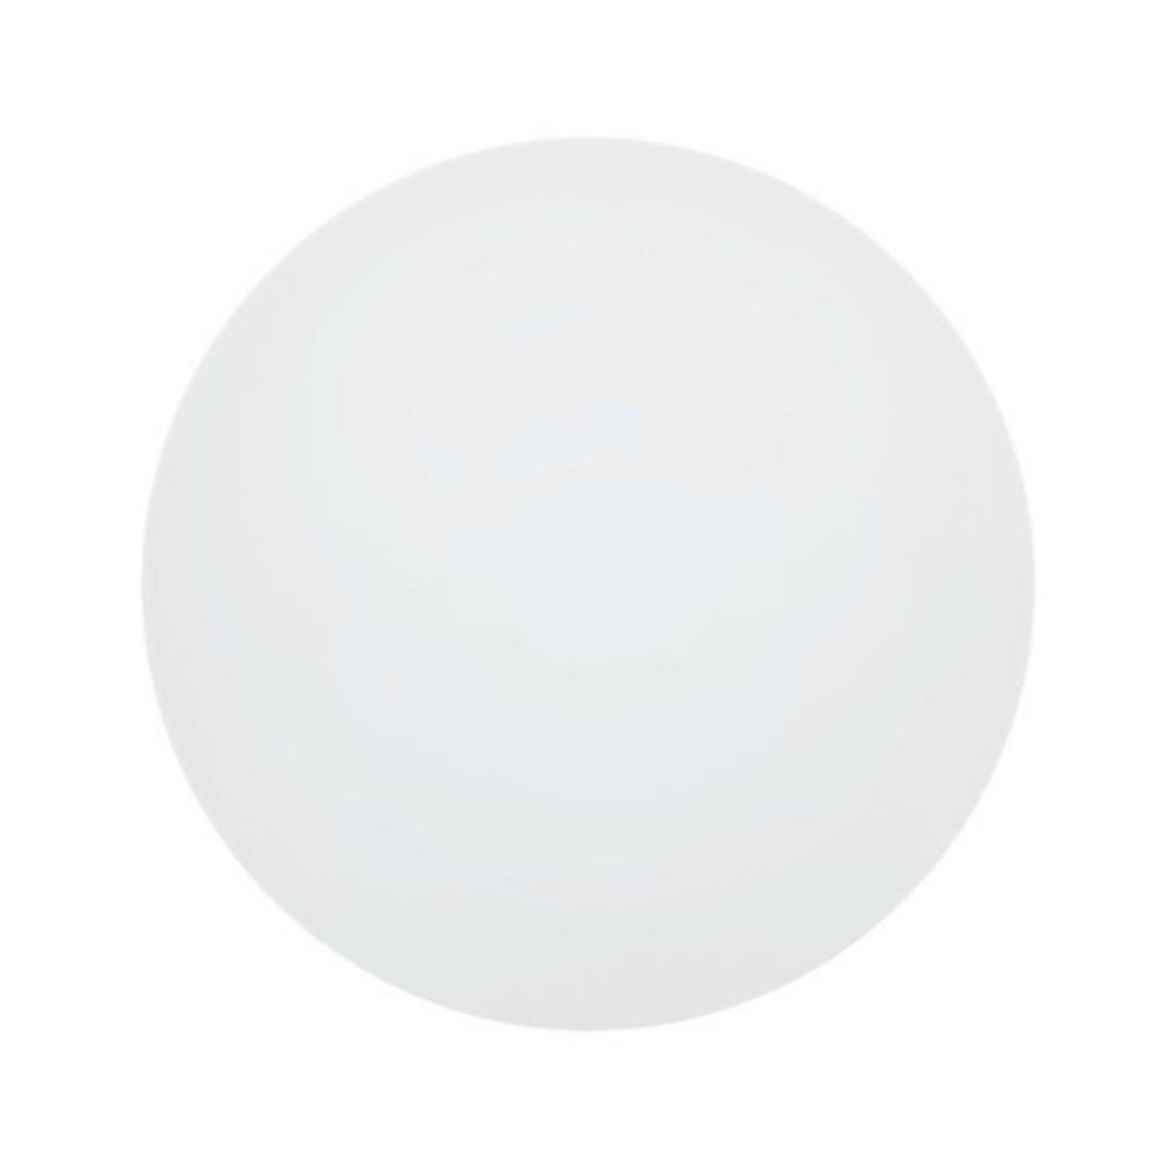 Picture of Silkroad White Charger Plate